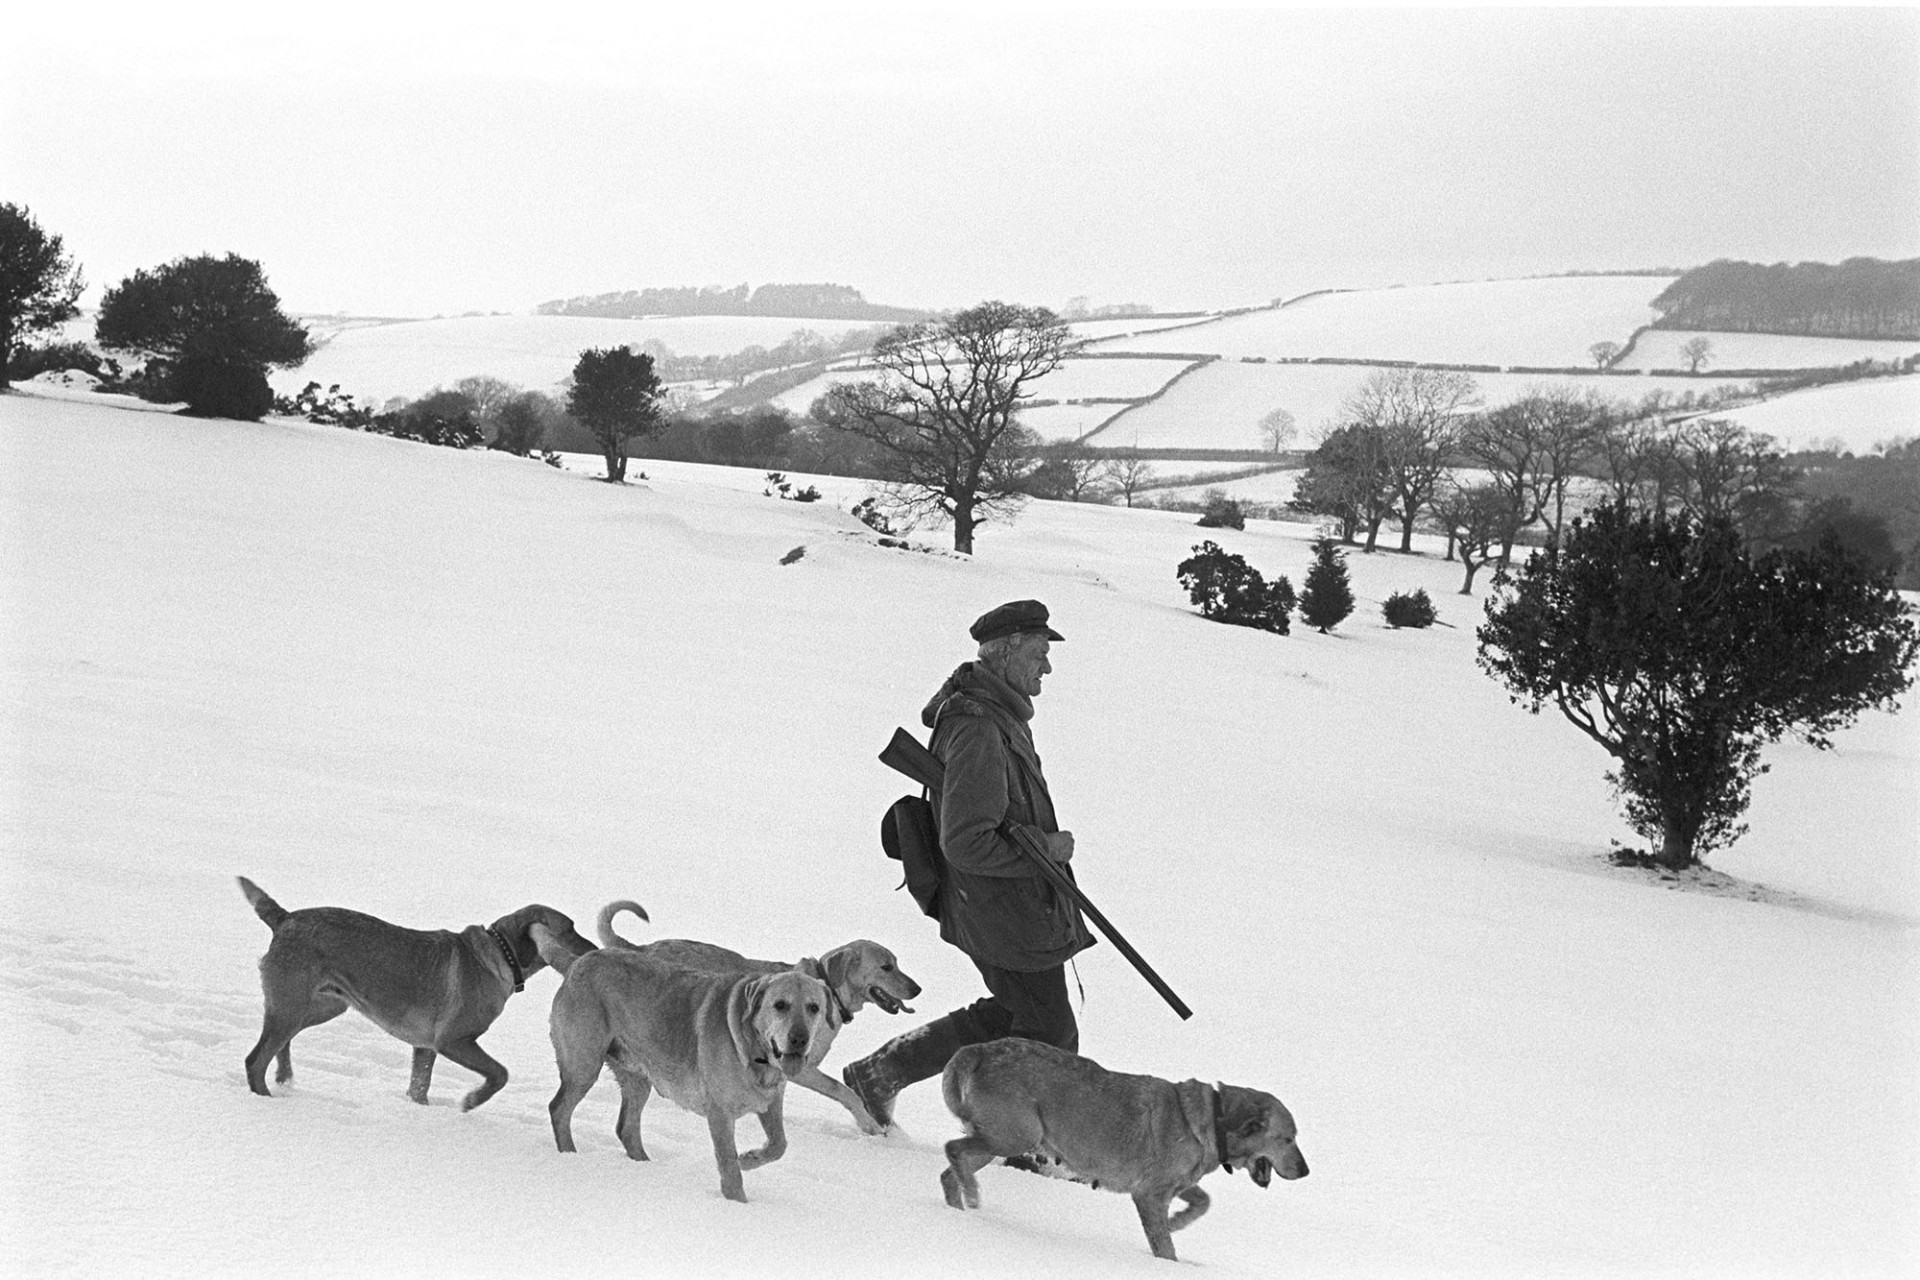 William Kelly out shooting in the snow by James Ravilious